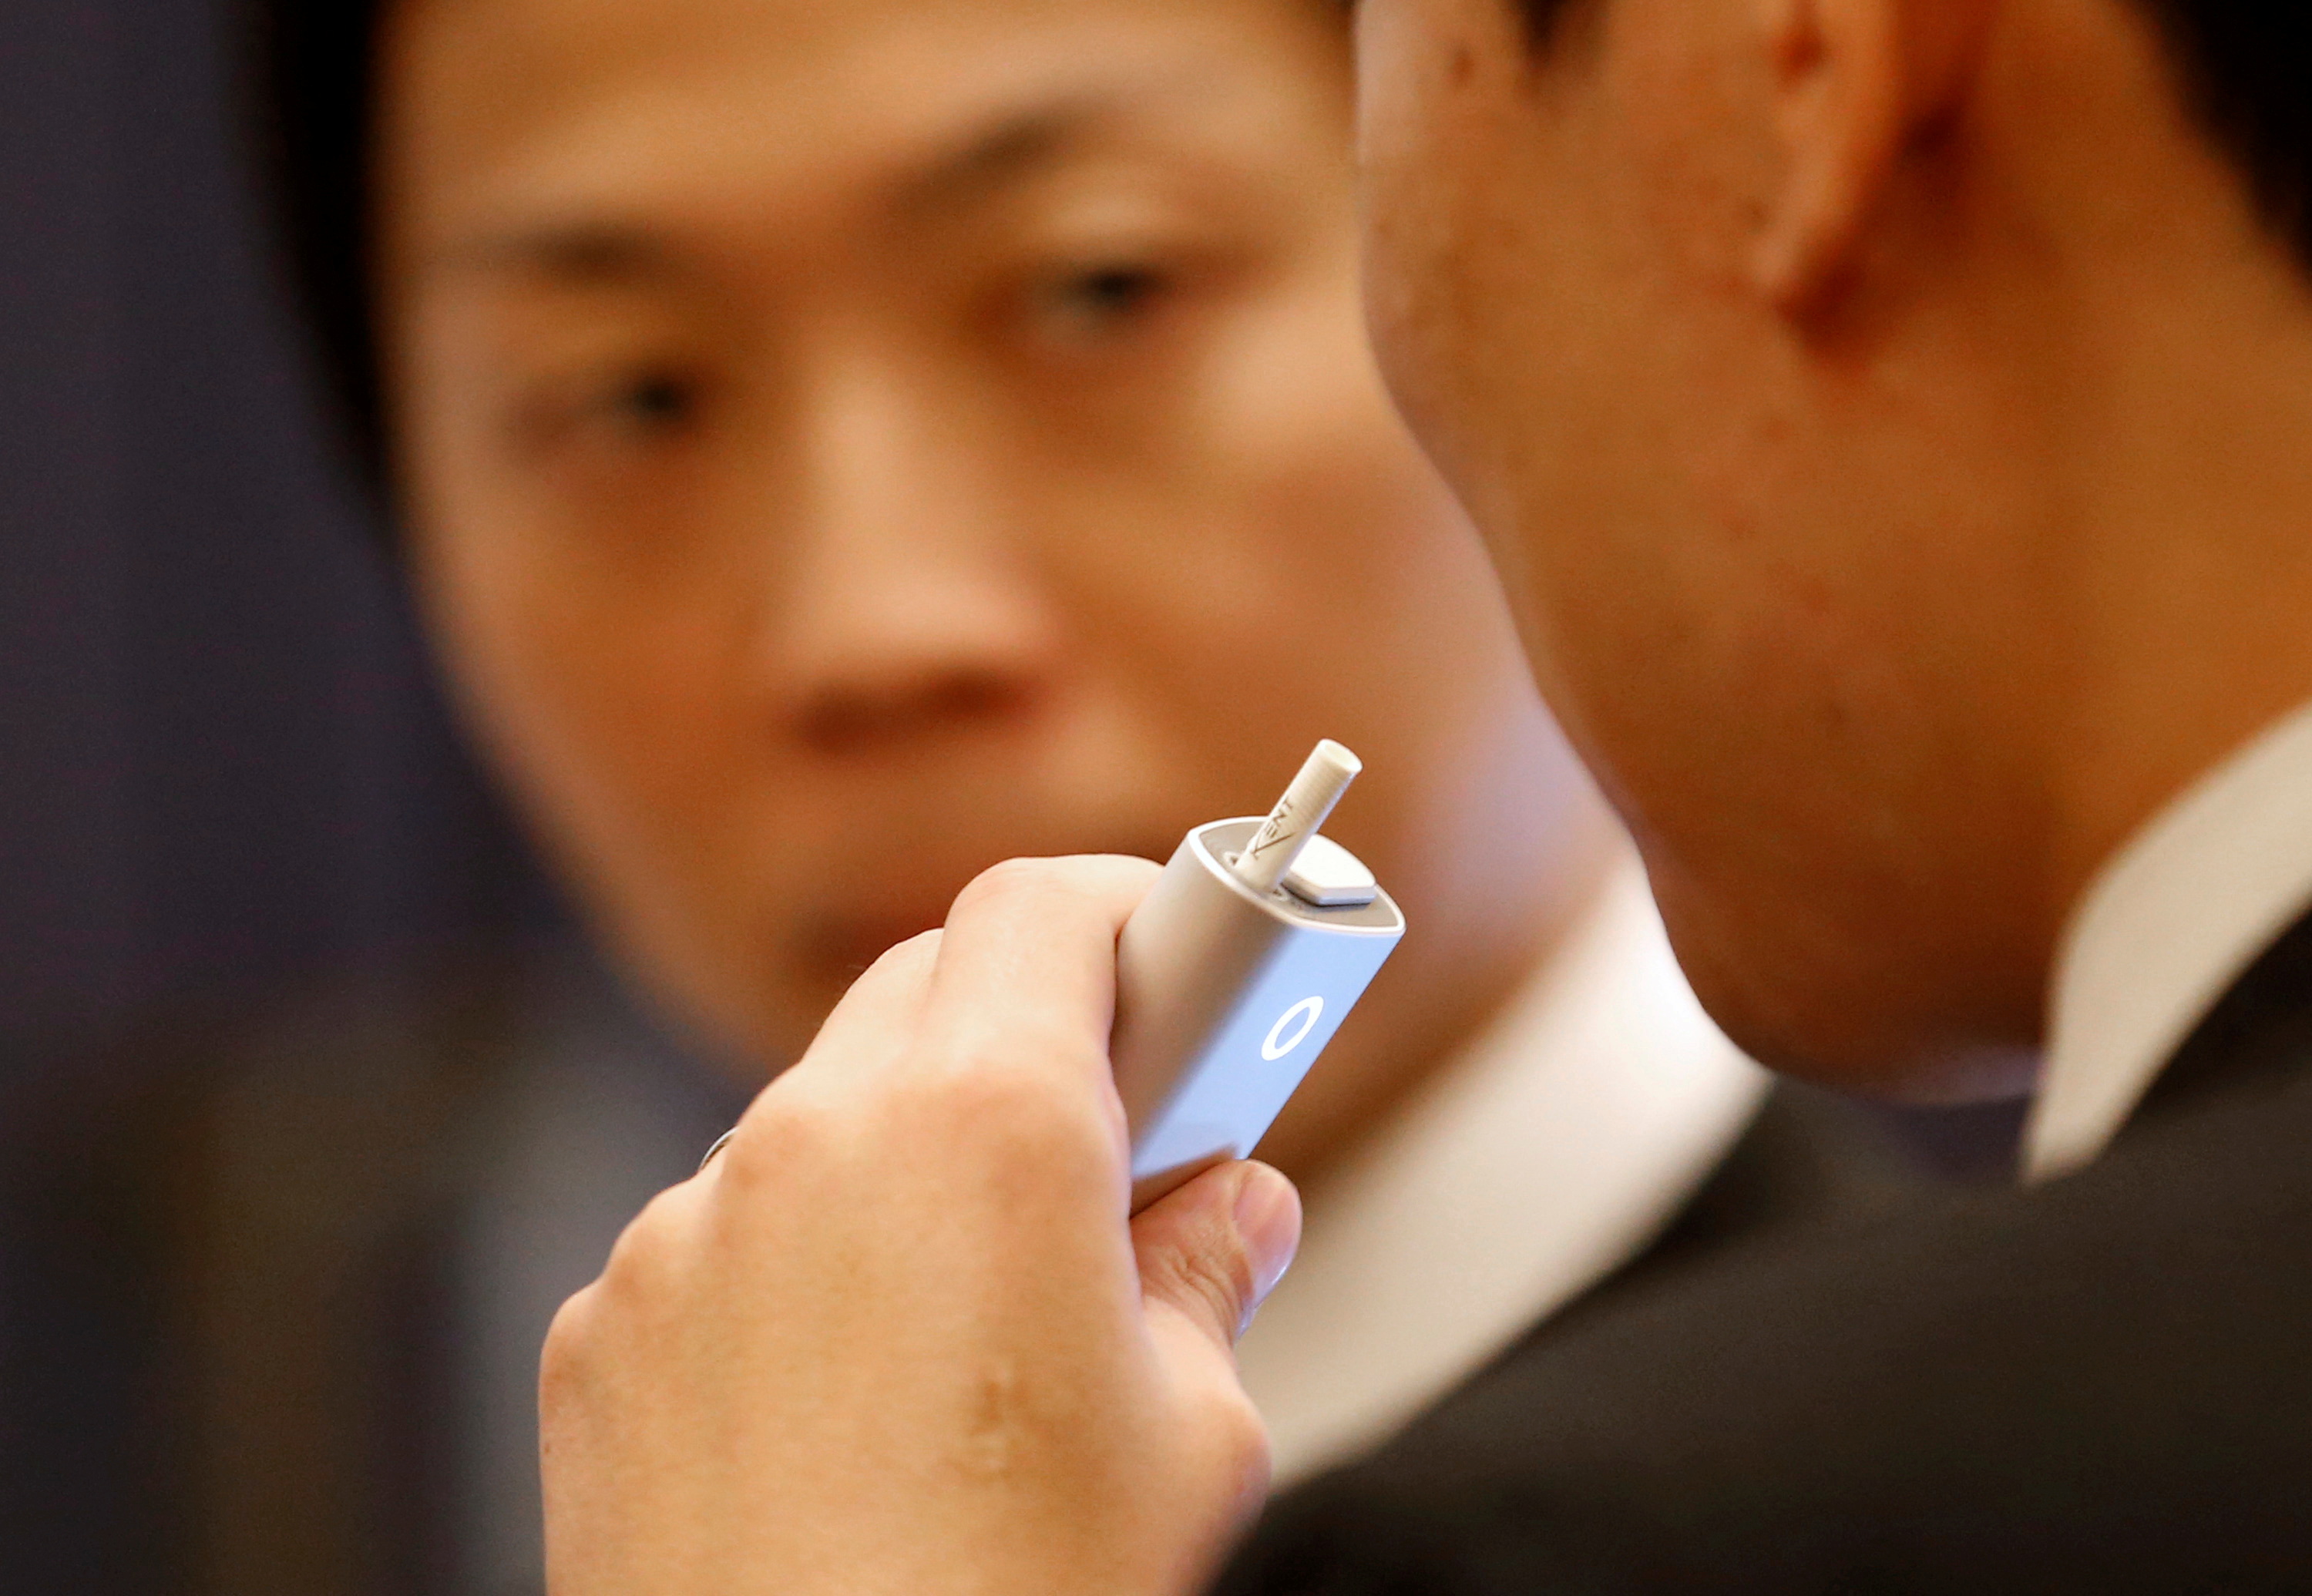 Attendees try British American Tobacco's new tobacco heating system device 'glo' after a news conference in Tokyo